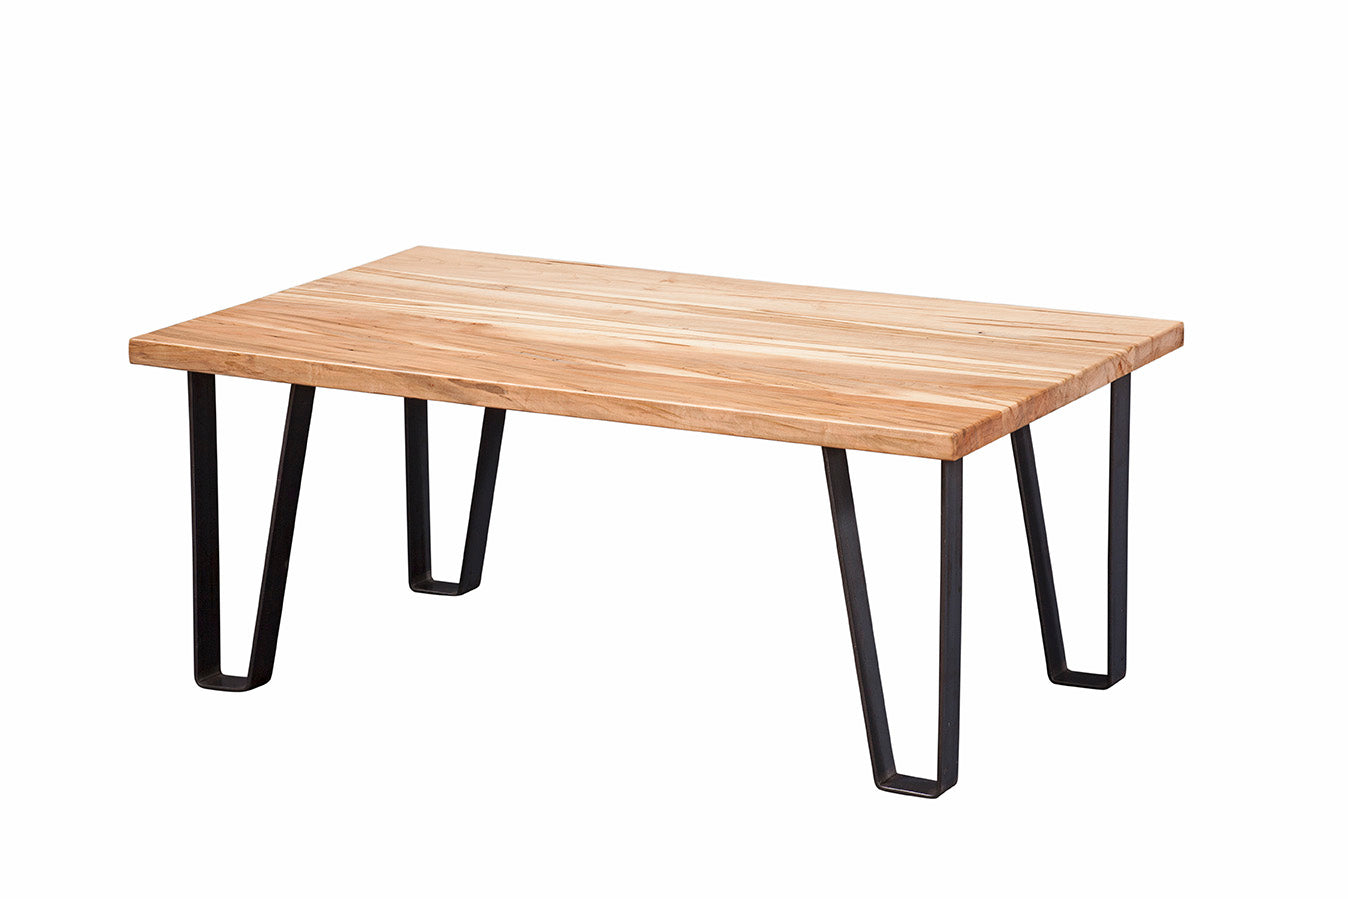 6"L x 28"W x 18"H - 13/16" thick wood rectangle tabletop. Steel powder coated legs